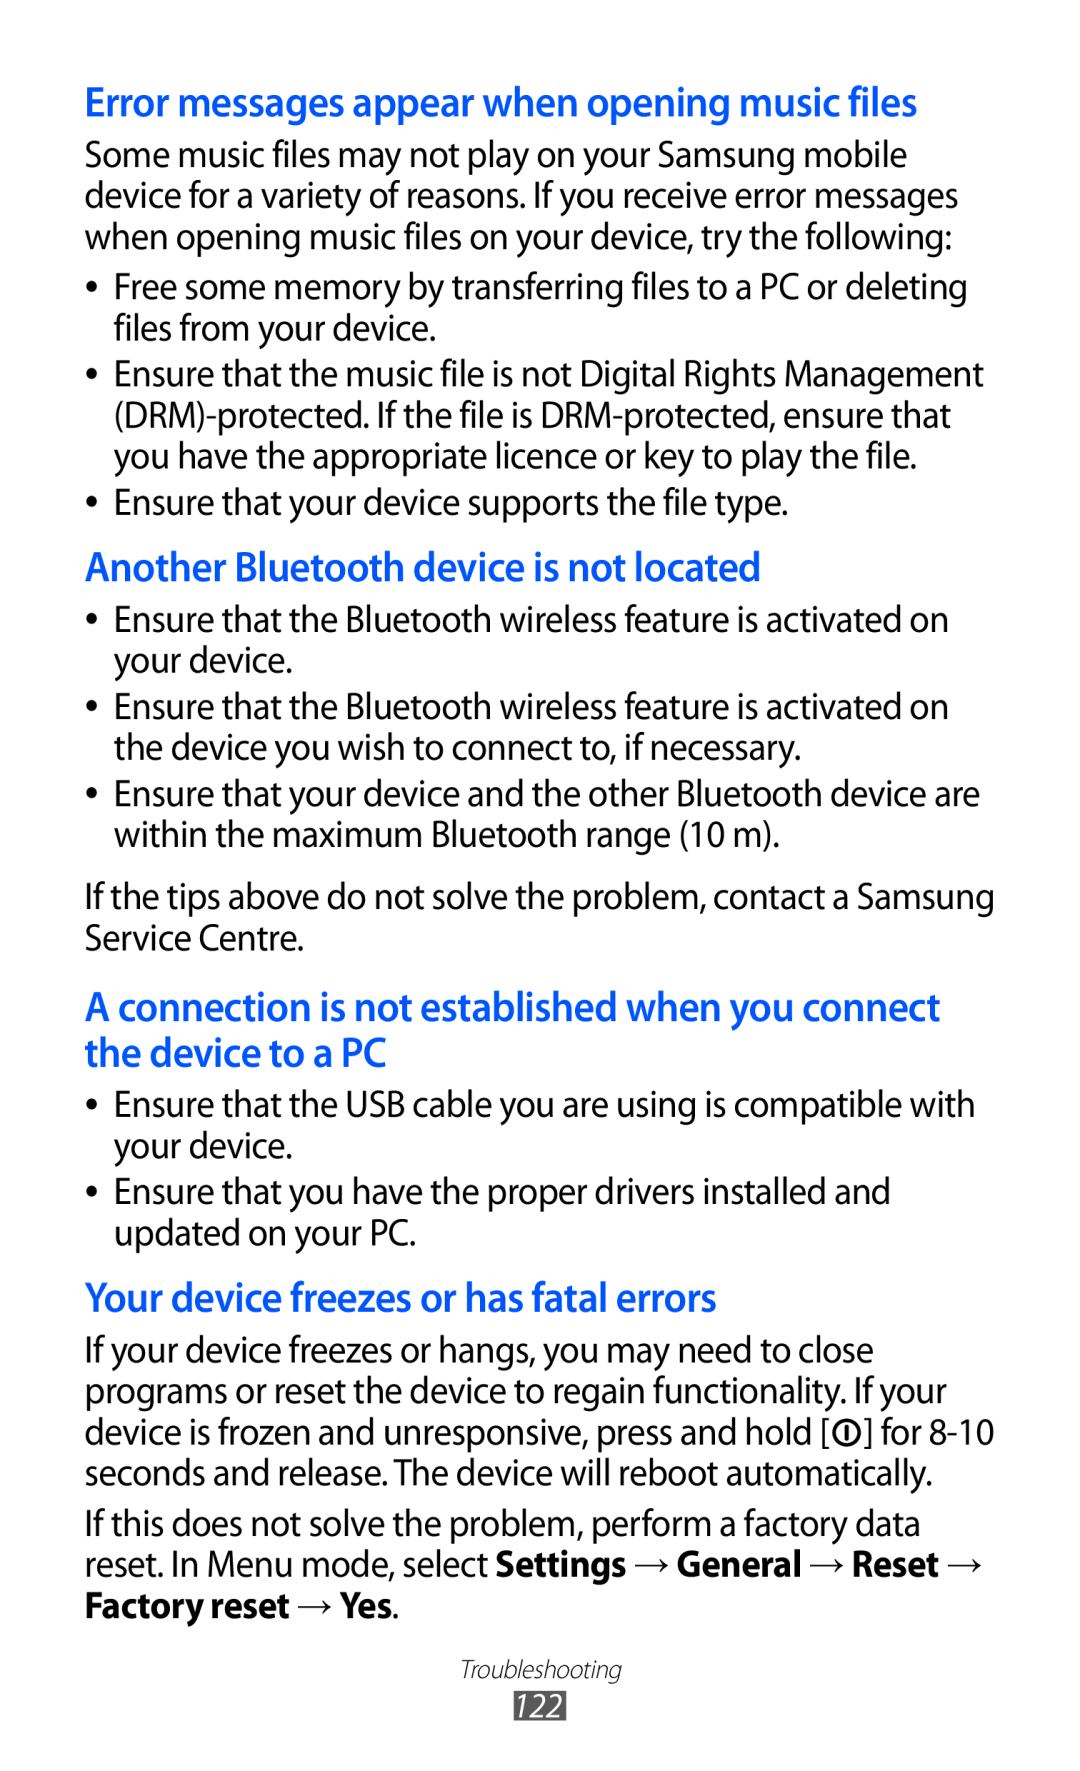 Samsung GT-S5380SSDDBT, GT-S5380SSADBT Another Bluetooth device is not located, Your device freezes or has fatal errors 